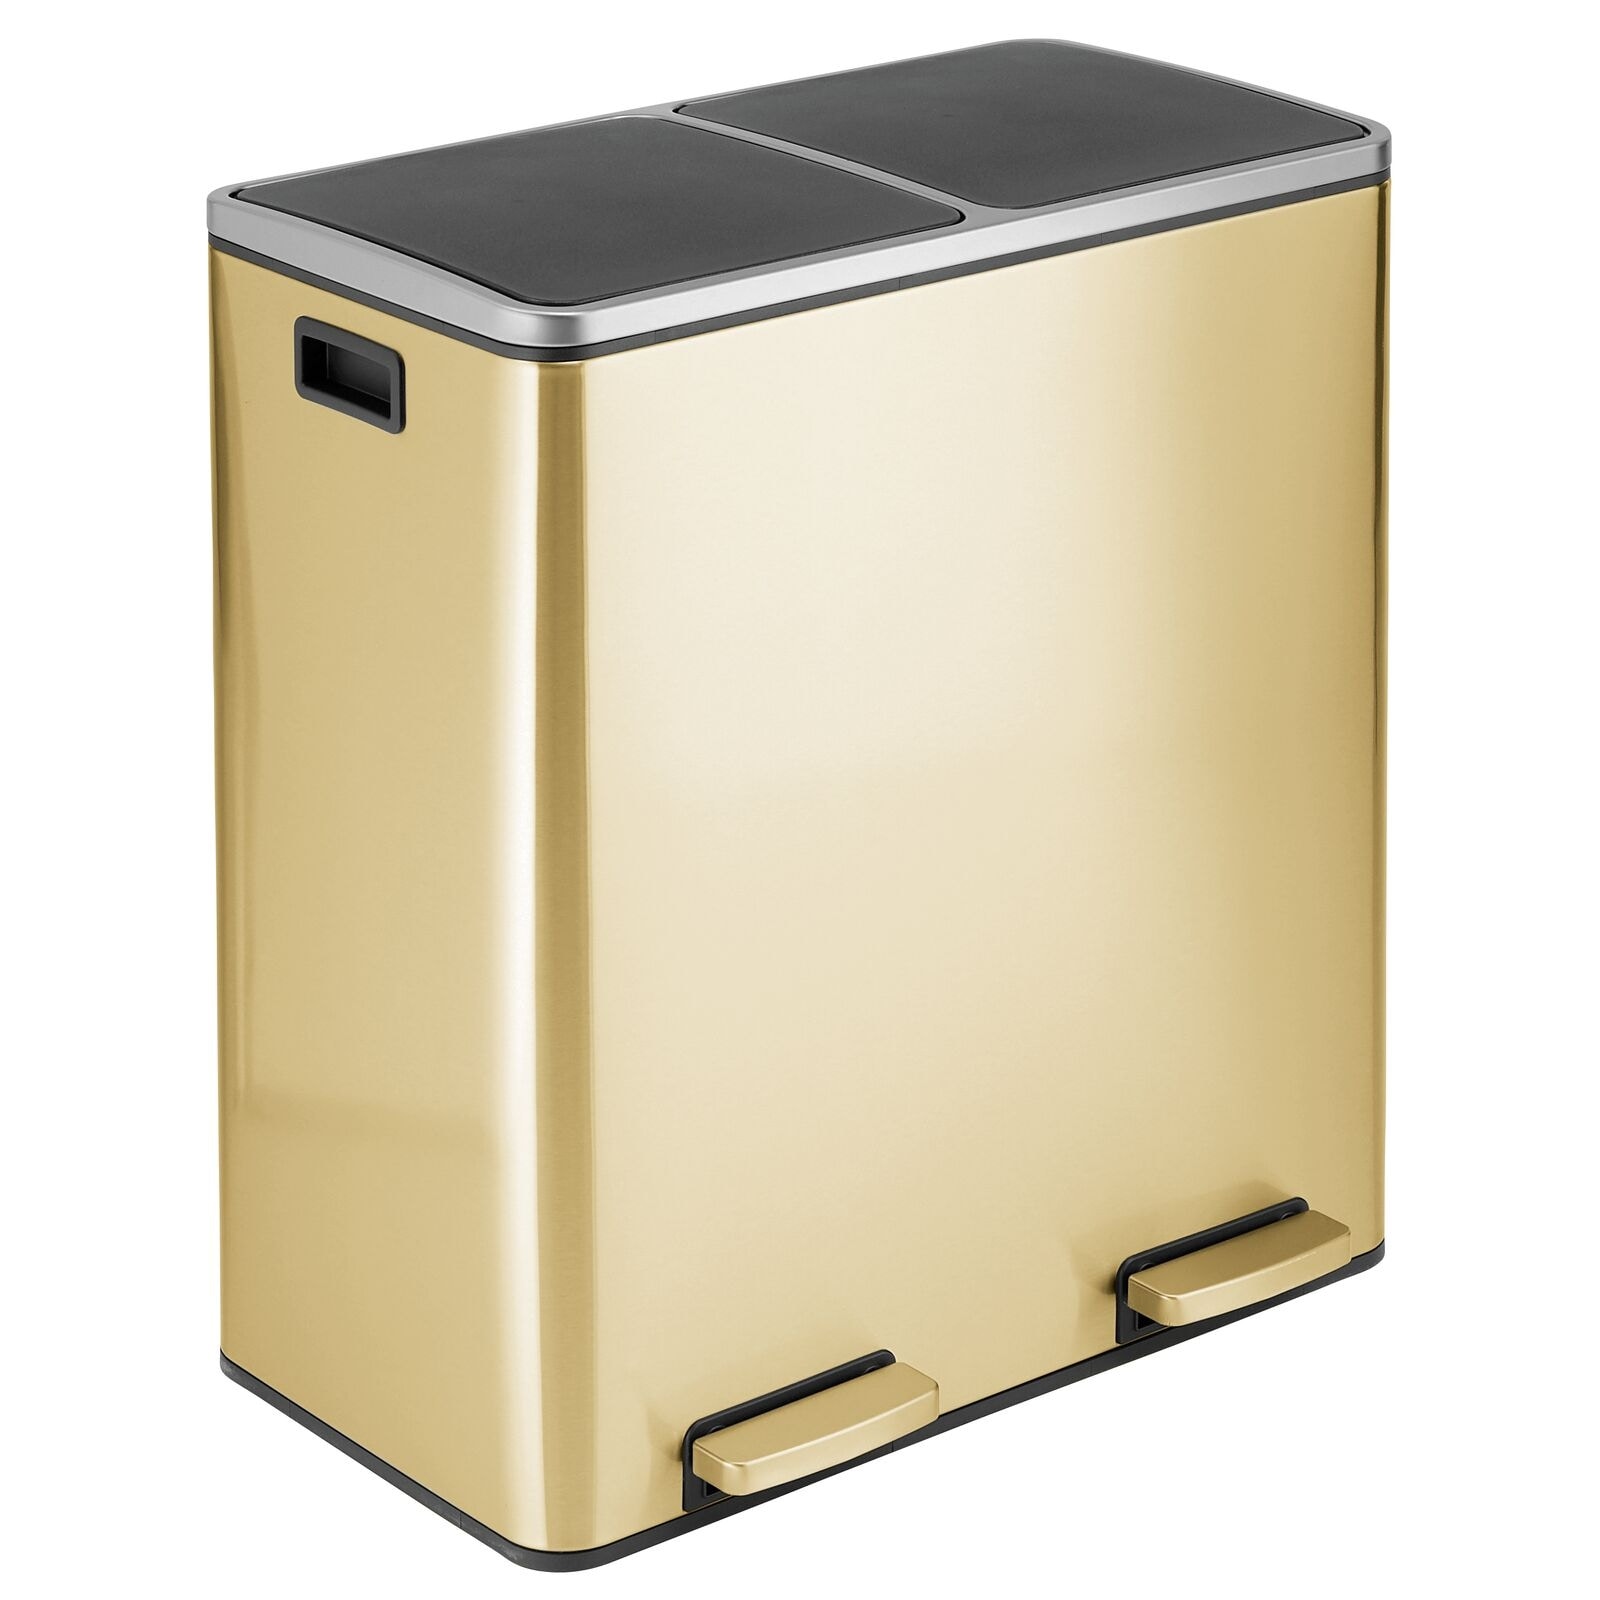 https://ak1.ostkcdn.com/images/products/is/images/direct/2894a6dde18fb367f476d6d91a2c636fd92fe1f8/mDesign-Divided-Large-Metal-Step-Trash-Can-Garbage%2C-60-Liter.jpg